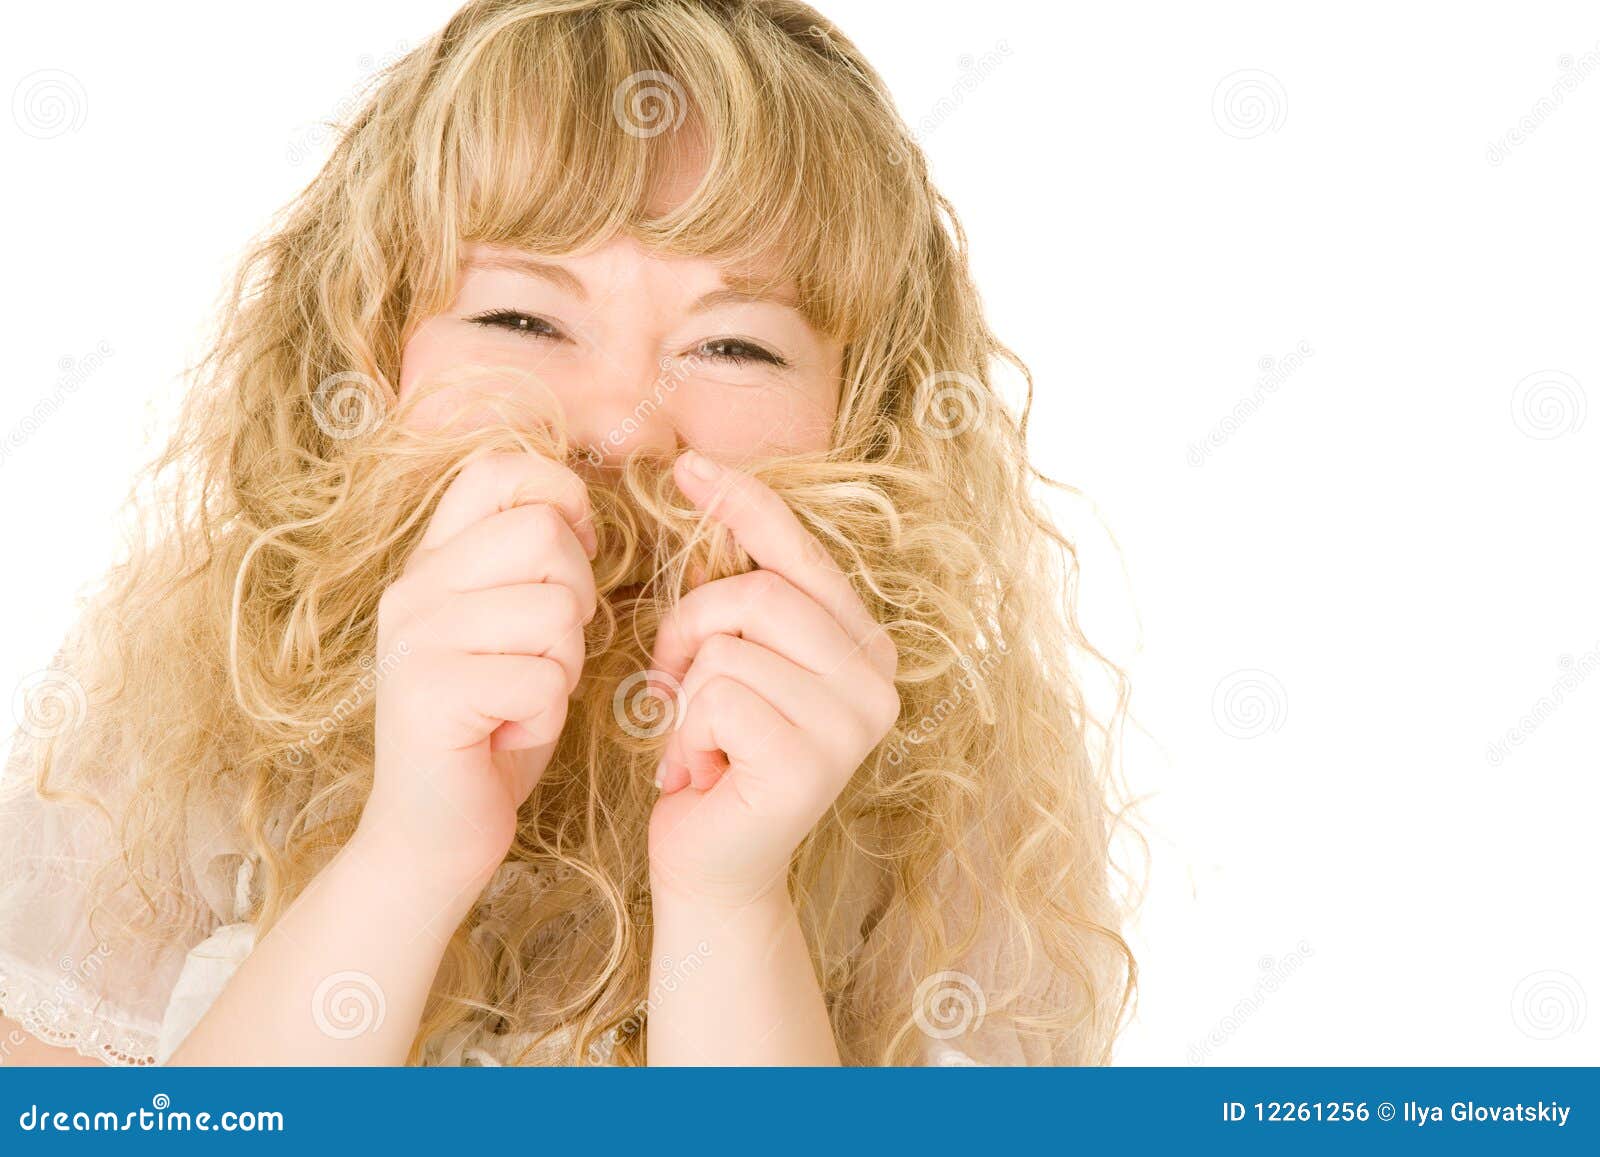 funny blonde curly hair